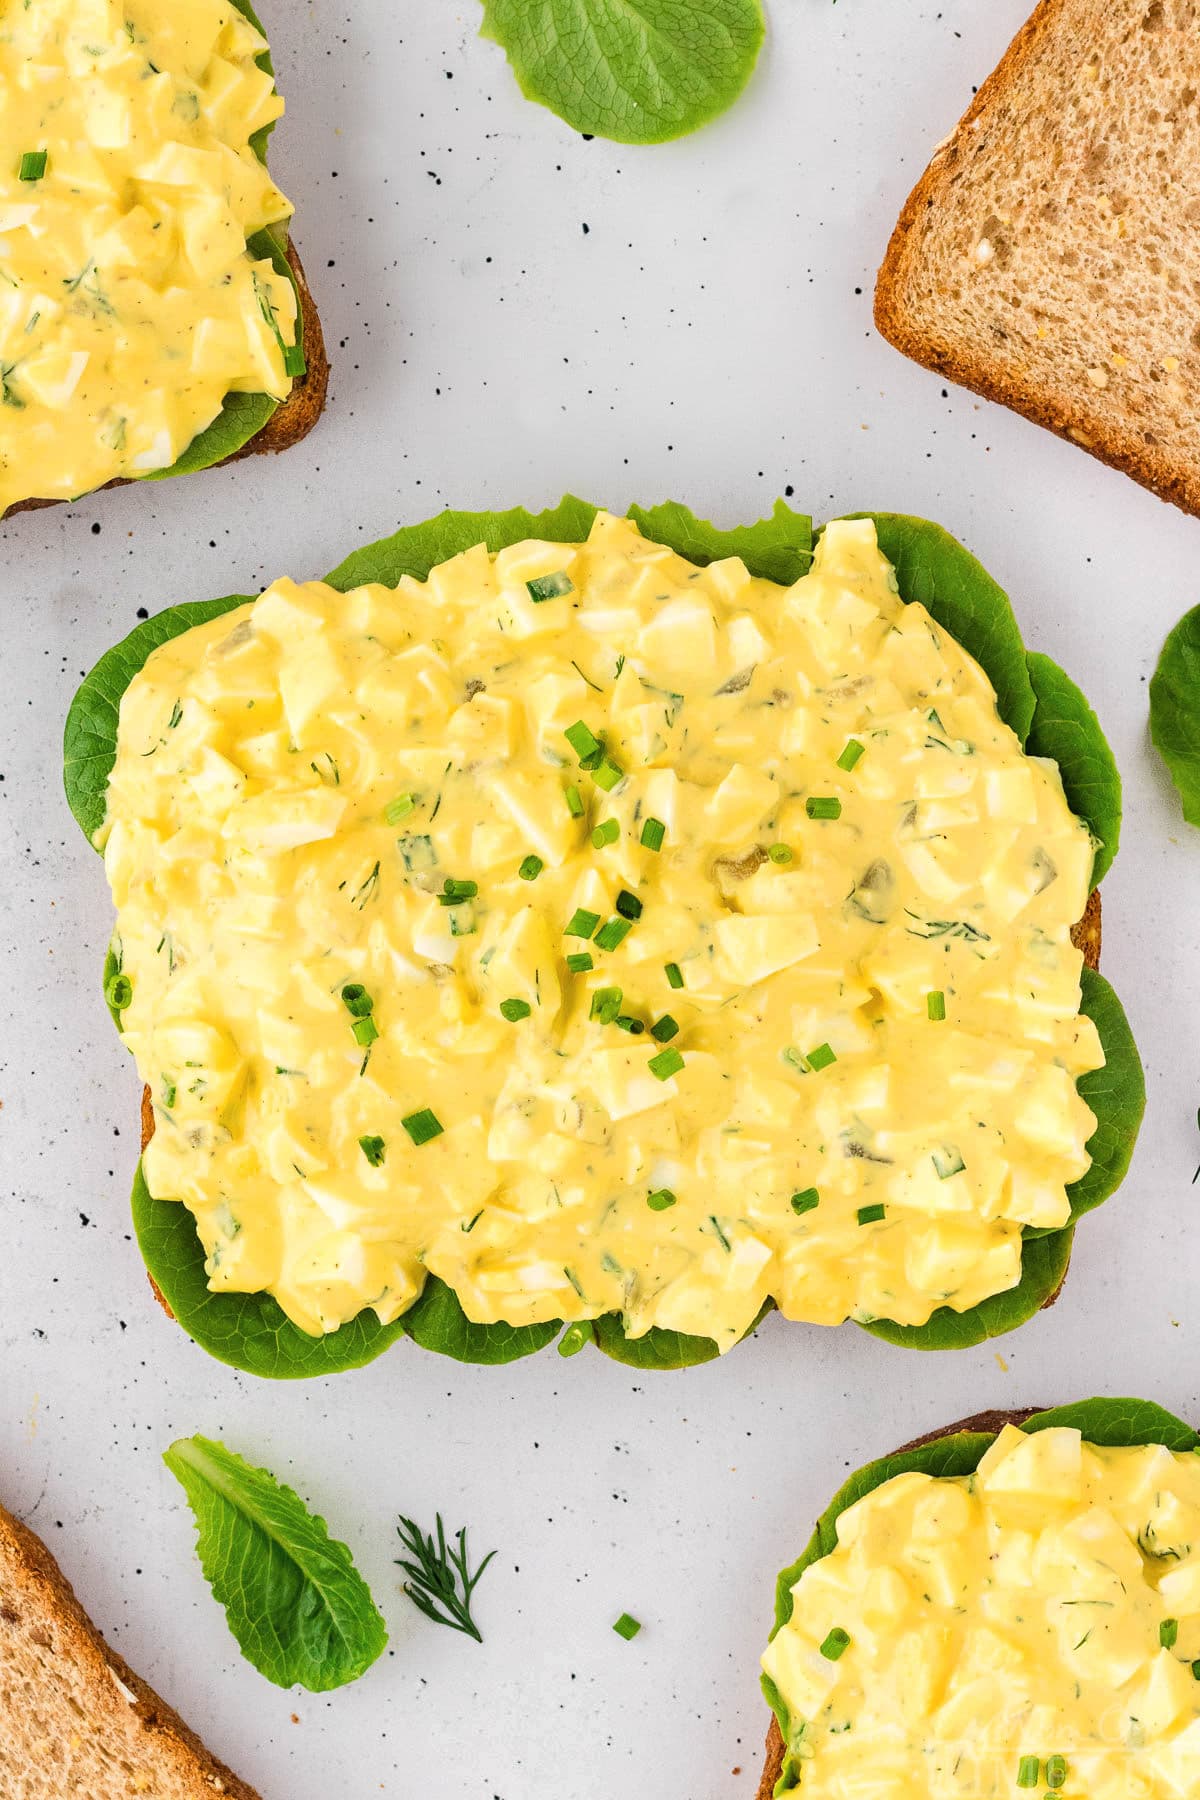 A top down view of egg salad on a piece of bread.